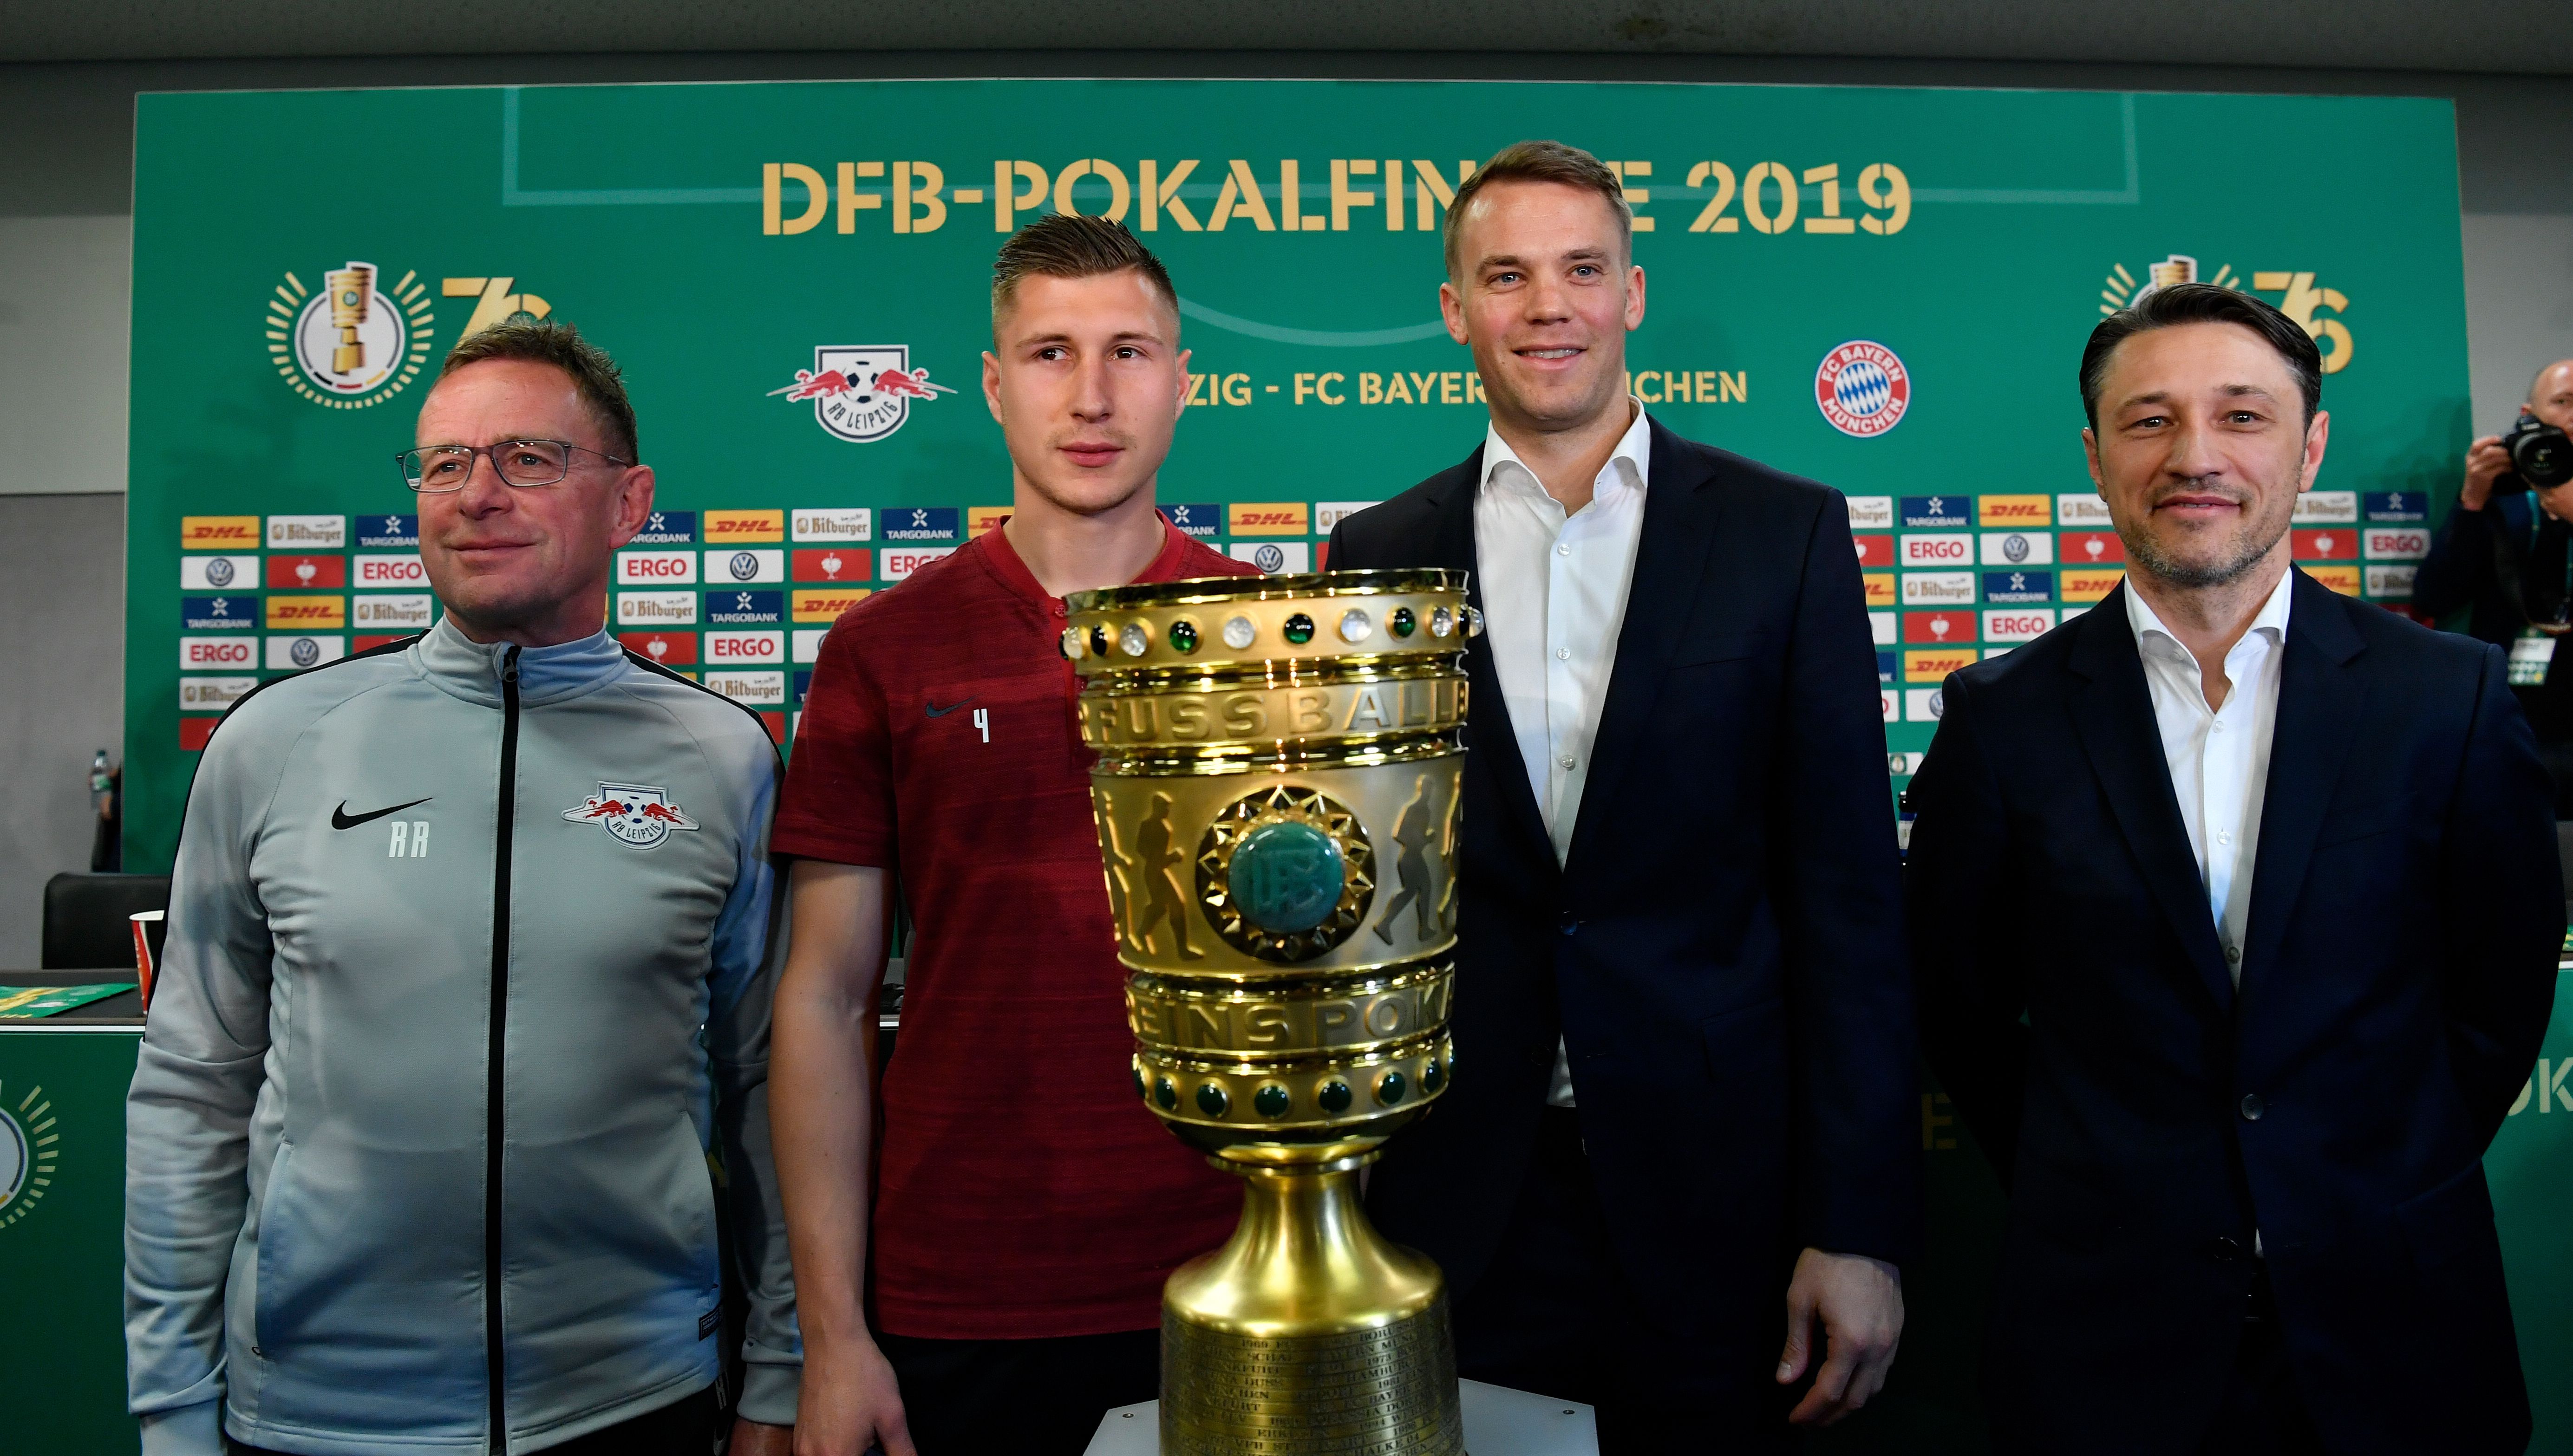 (L-R) Leipzig's German headcoach Ralf Rangnick, Leipzig's German defender Willi Orban, Bayern Munich's German goalkeeper Manuel Neuerand Bayern Munich's Croatian headcoach Niko Kovac pose with the trophy after a press conference on the eve of the German Cup (DFB Pokal) Final football match RB Leipzig v FC Bayern Munich at the Olympic Stadium in Berlin on May 24, 2019. (Photo by John MACDOUGALL / AFP)        (Photo credit should read JOHN MACDOUGALL/AFP/Getty Images)